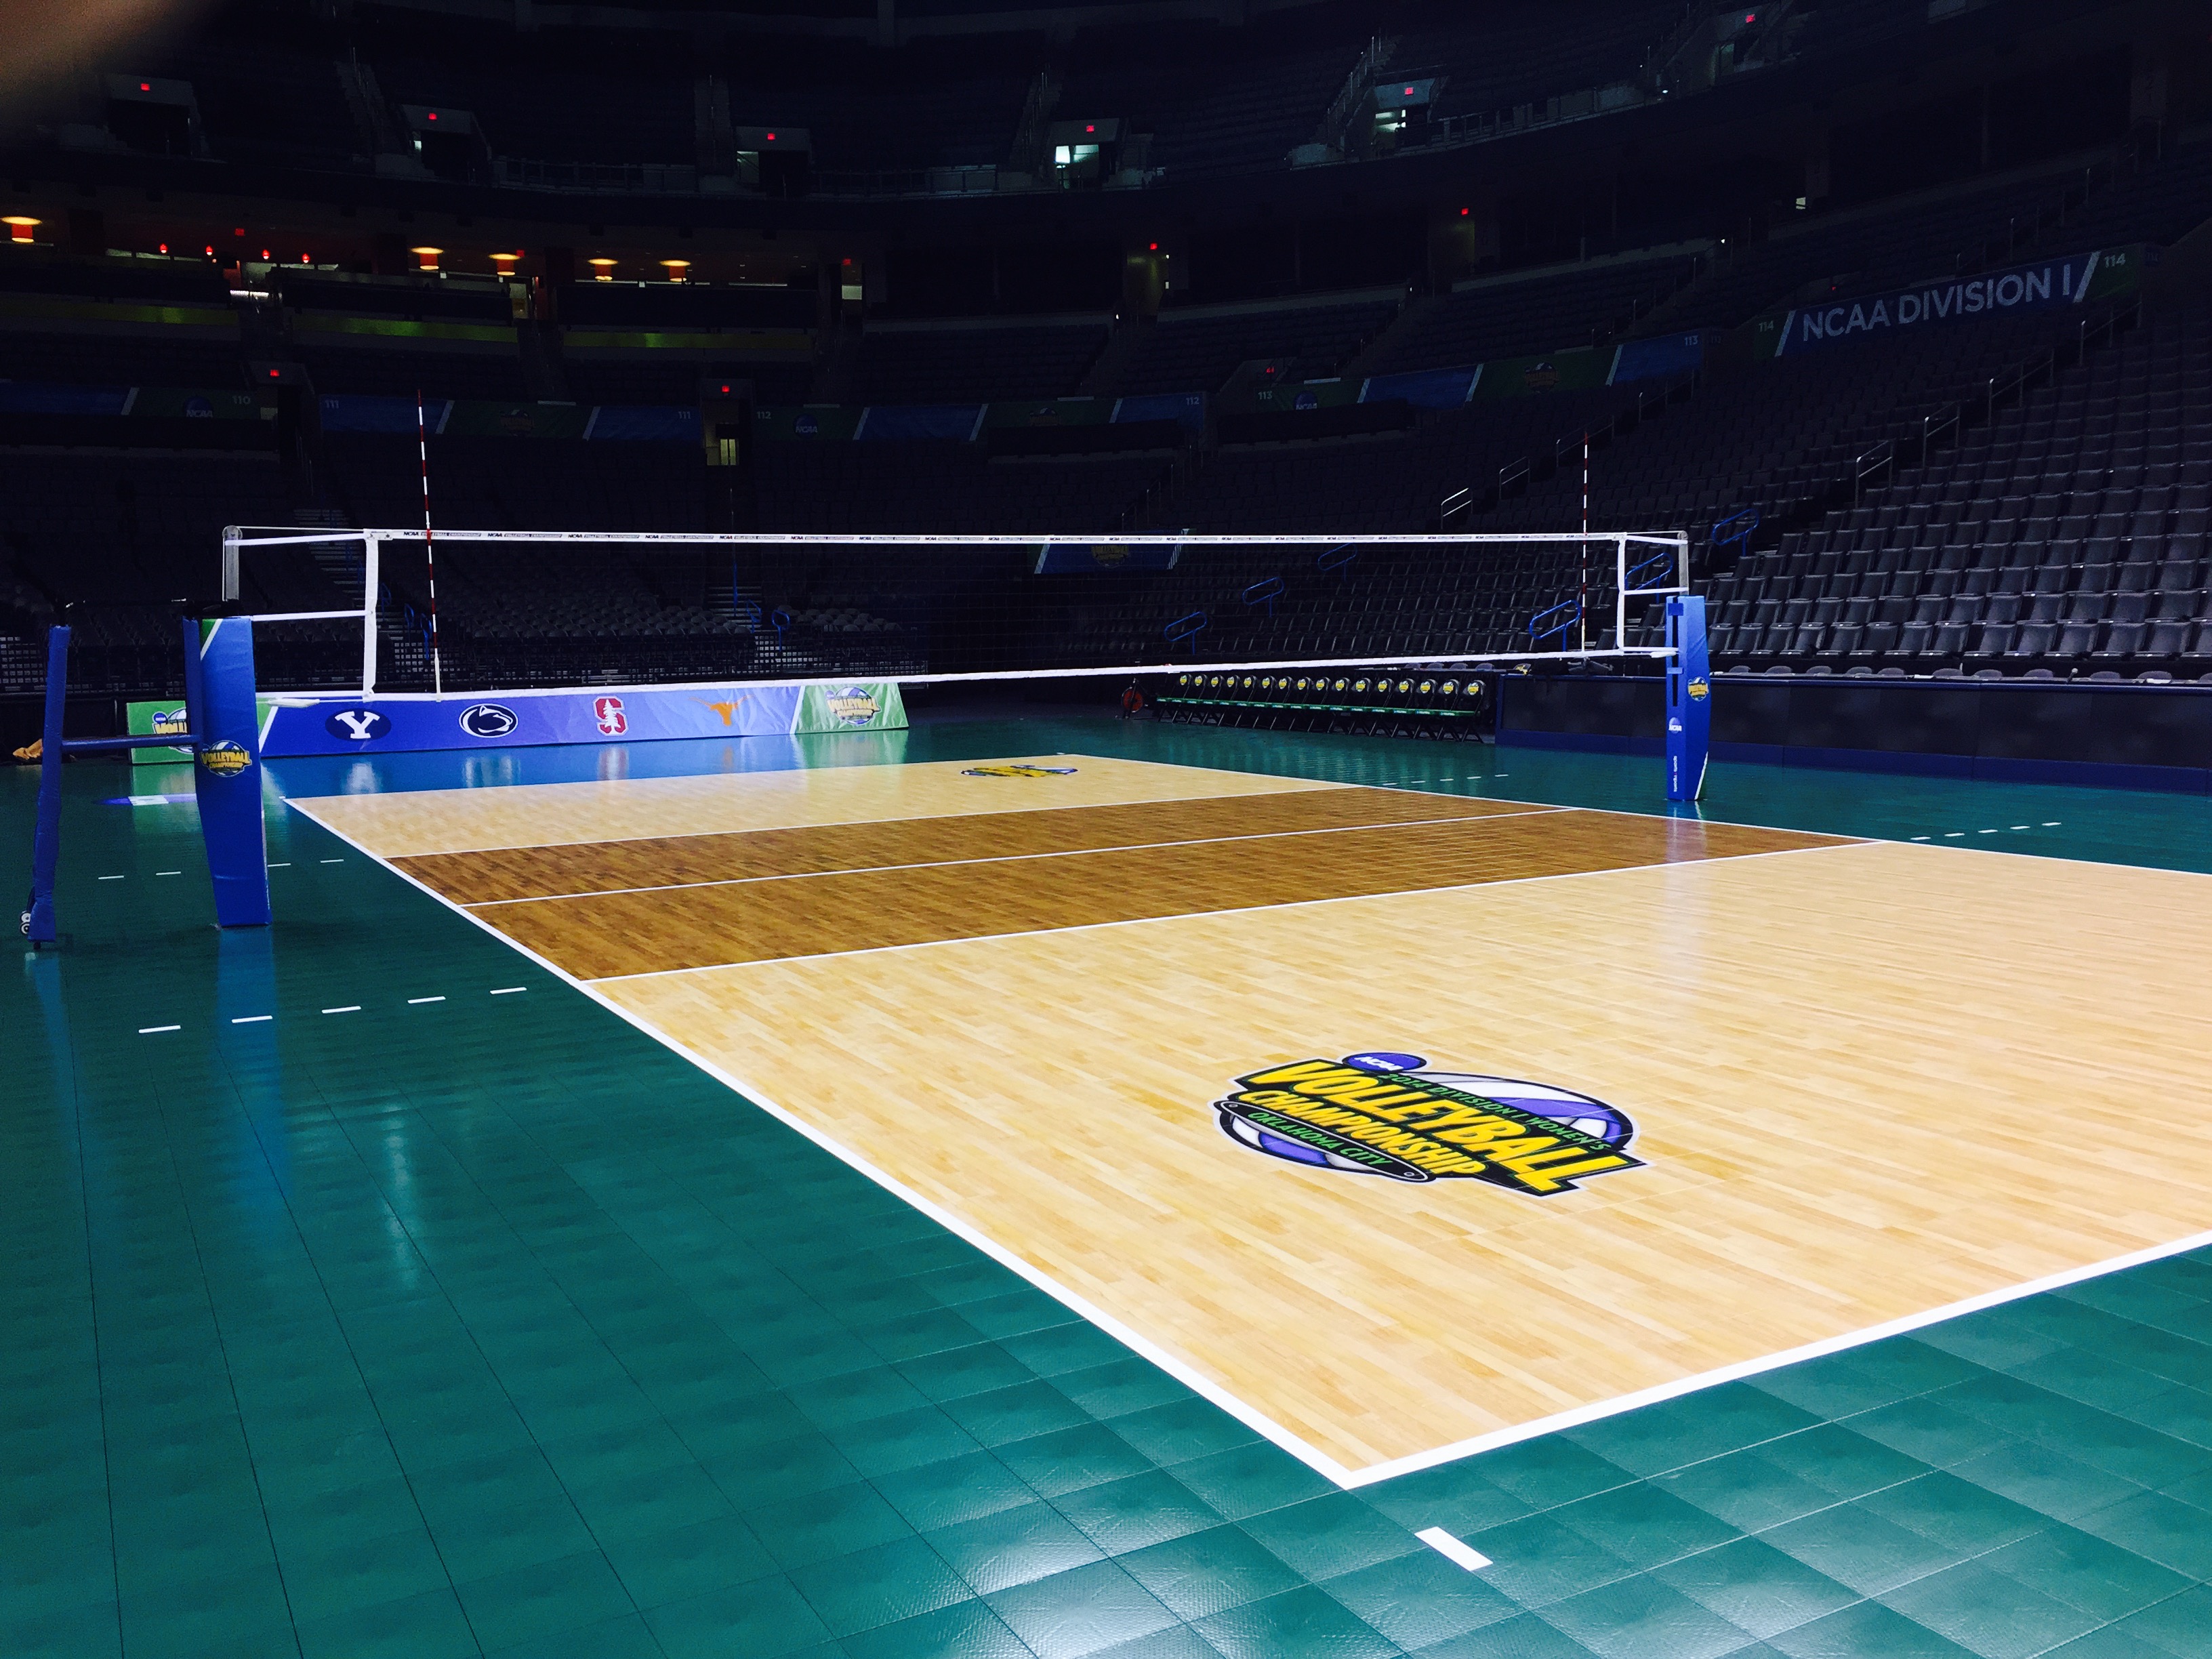 Court level of the Official Court for the 2014 NCAA DI Women's Volleyball Championships